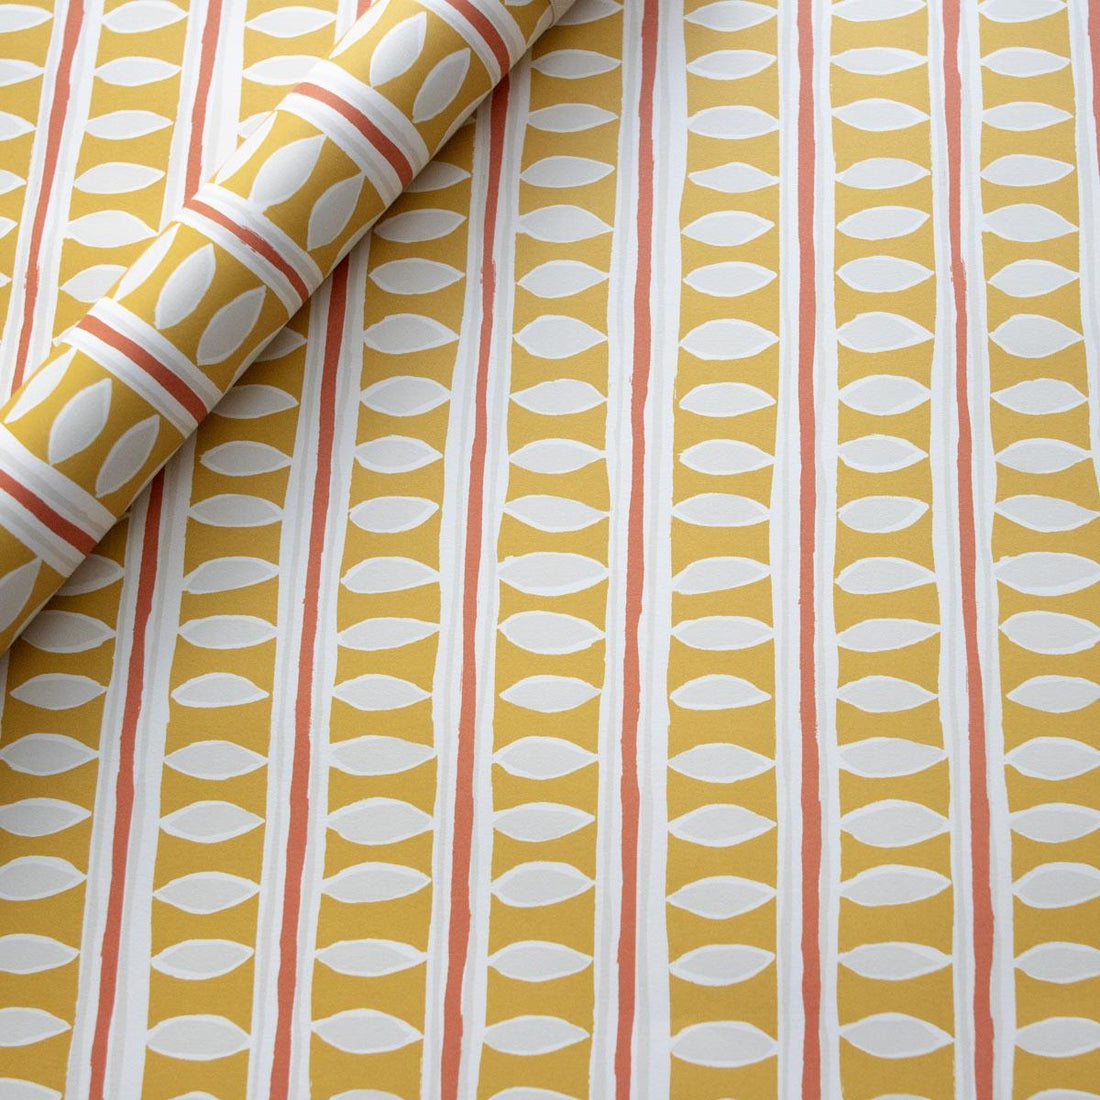 CAMBRIDGE IMPRINT SMALL WRAPPING PAPER | YELLOWS